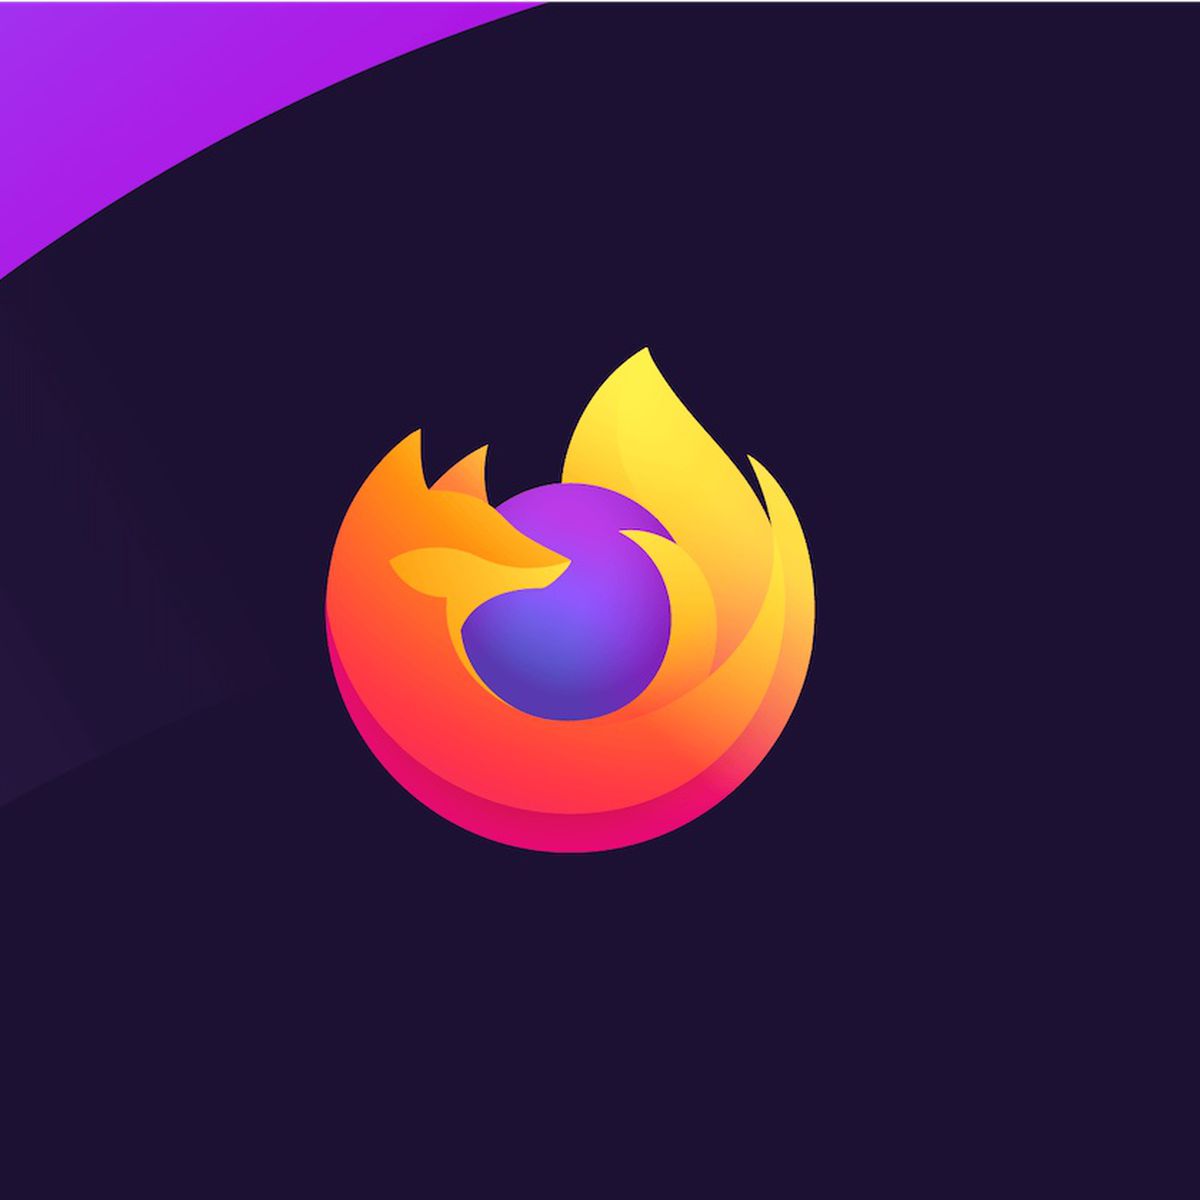 what is the most recent version of firefox for mac